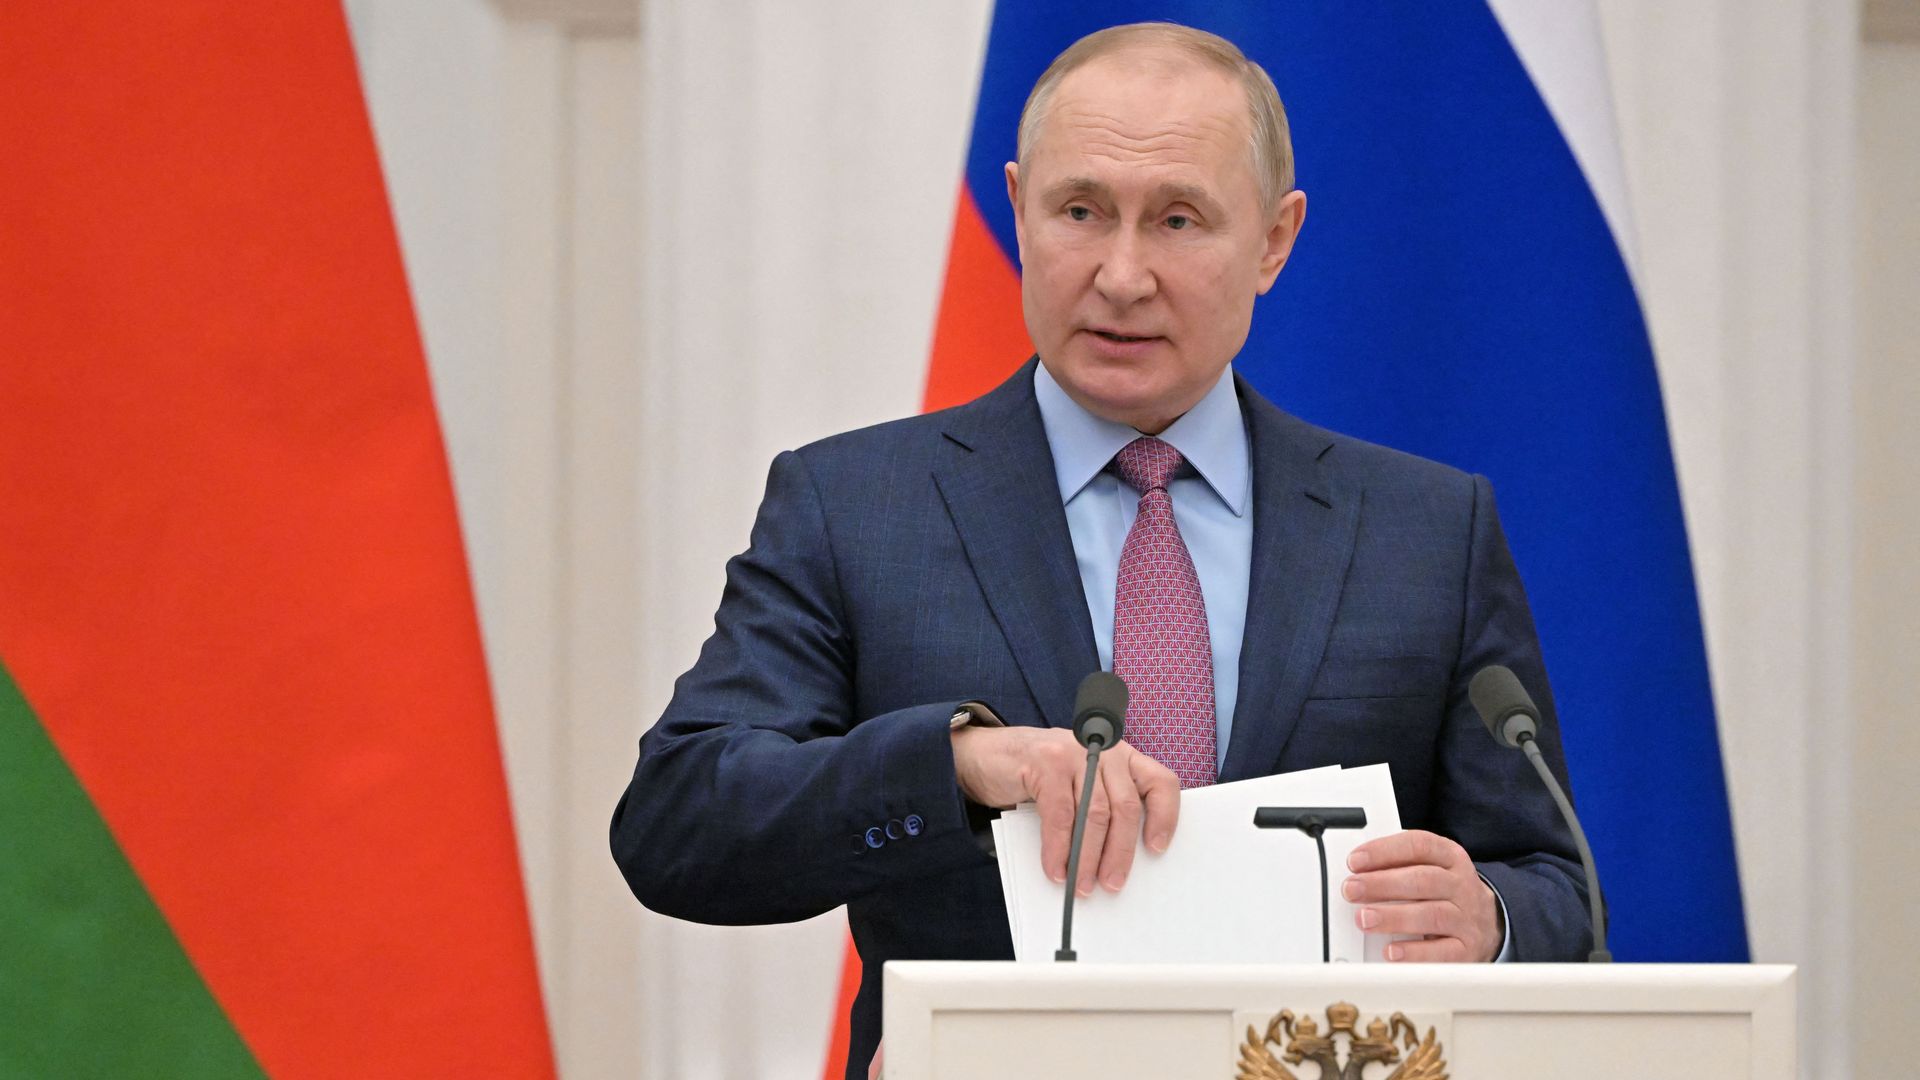 Russia's President Vladimir Putin speaks during a press conference  at the Kremlin in Moscow on February 18.